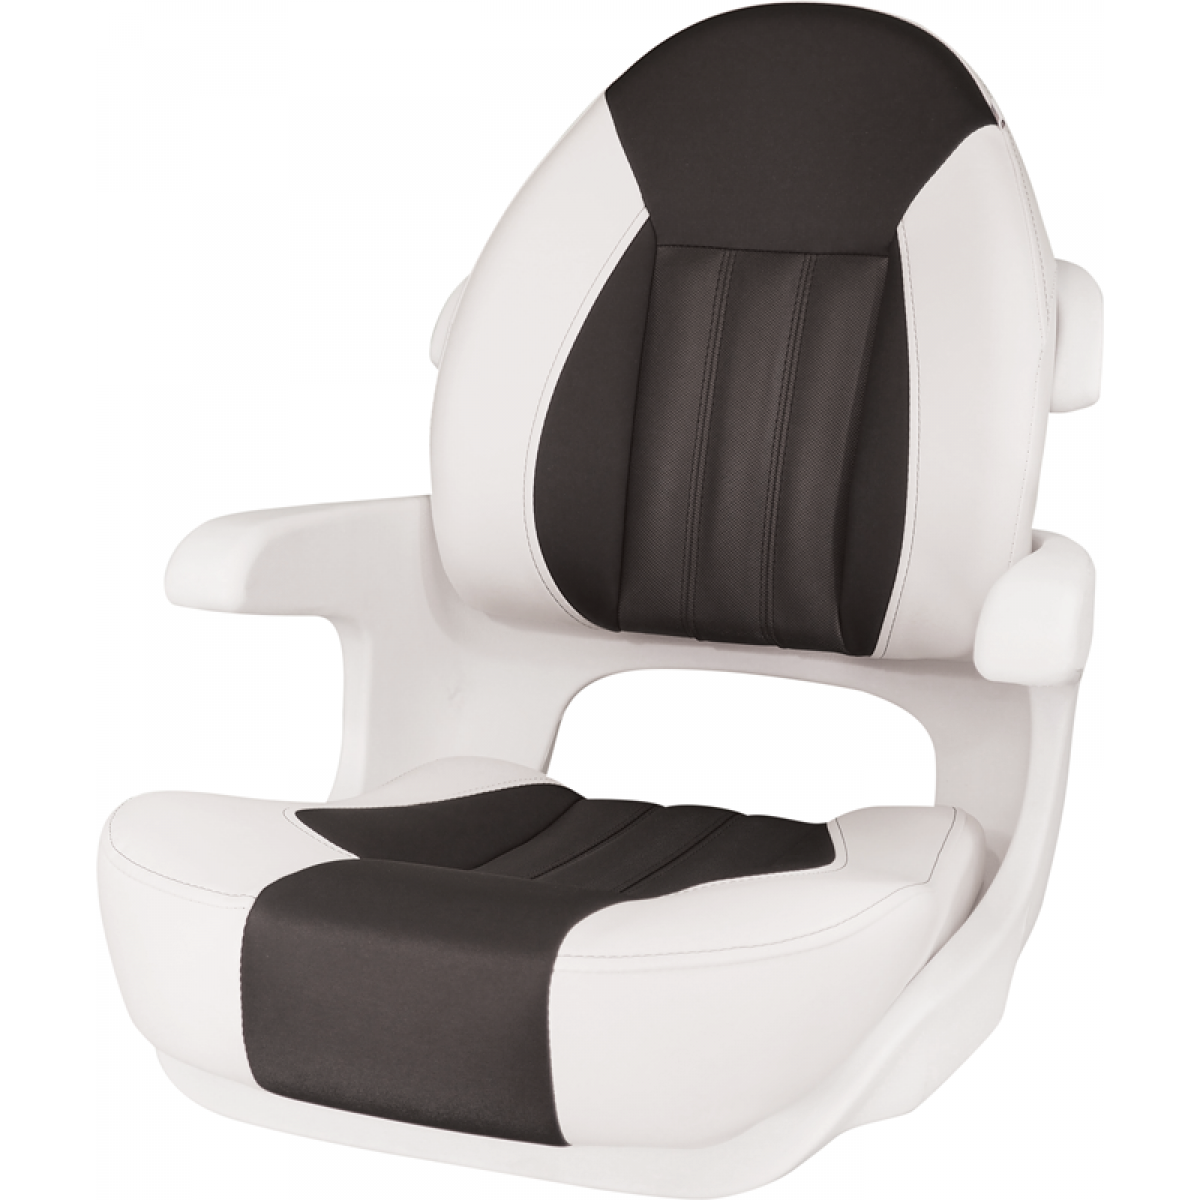 Seats and Chairs For Your Boat  Steveston Marine and Hardware Canada